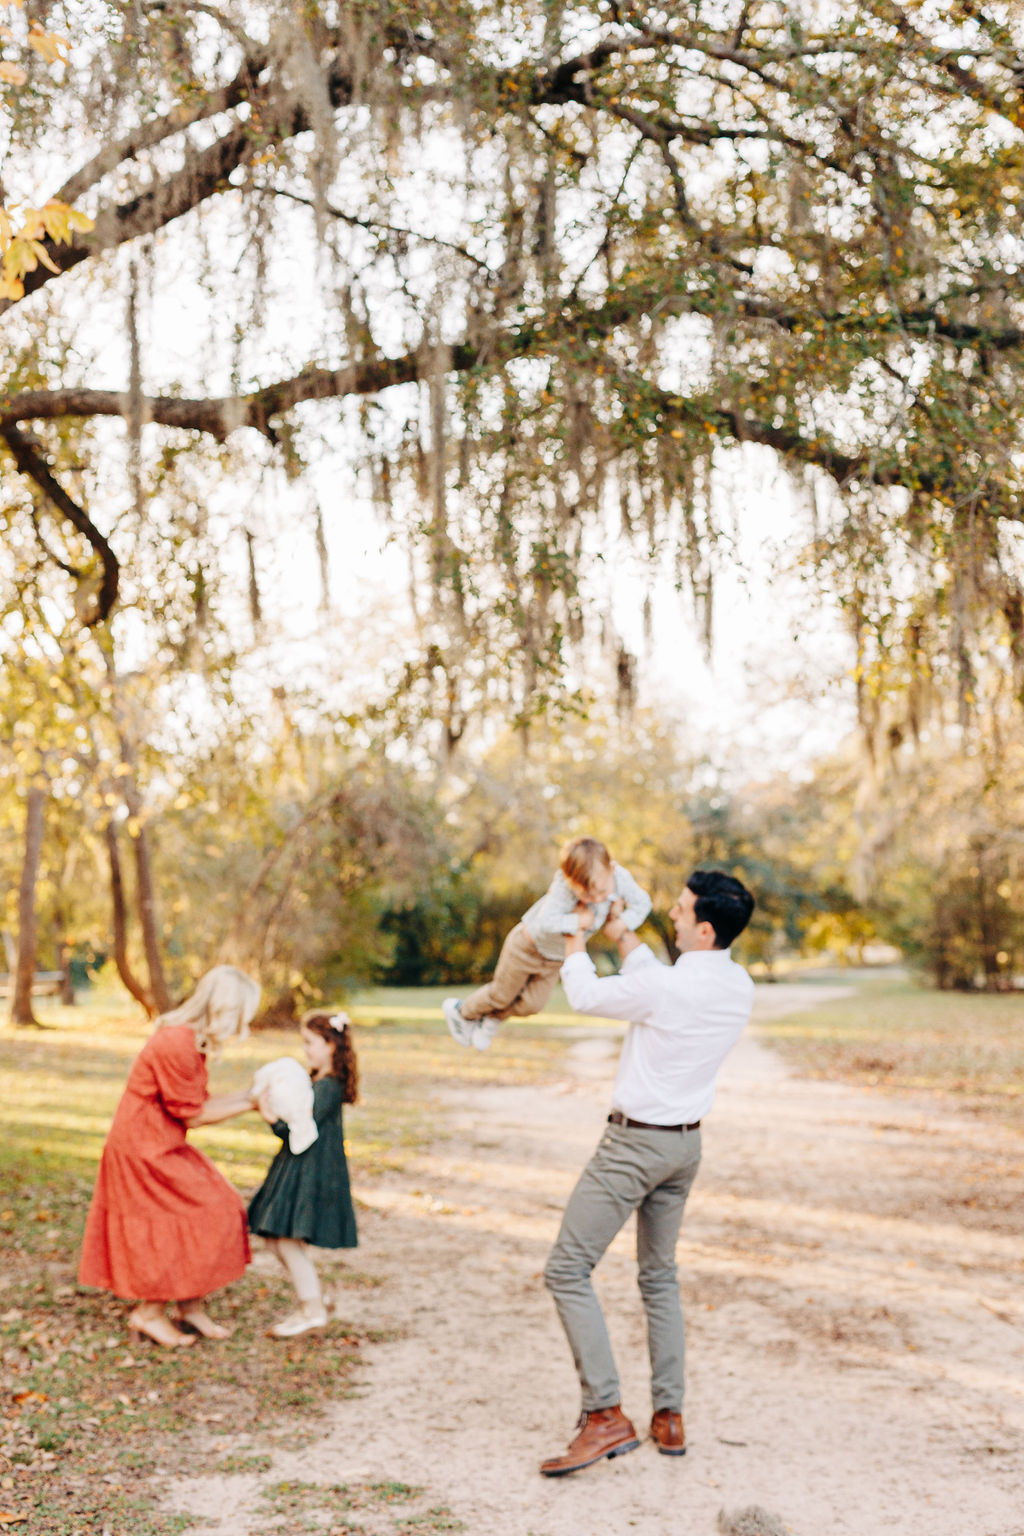 A father lifts and spins with his toddler son while mom helps their daughter hold a newborn baby in a park